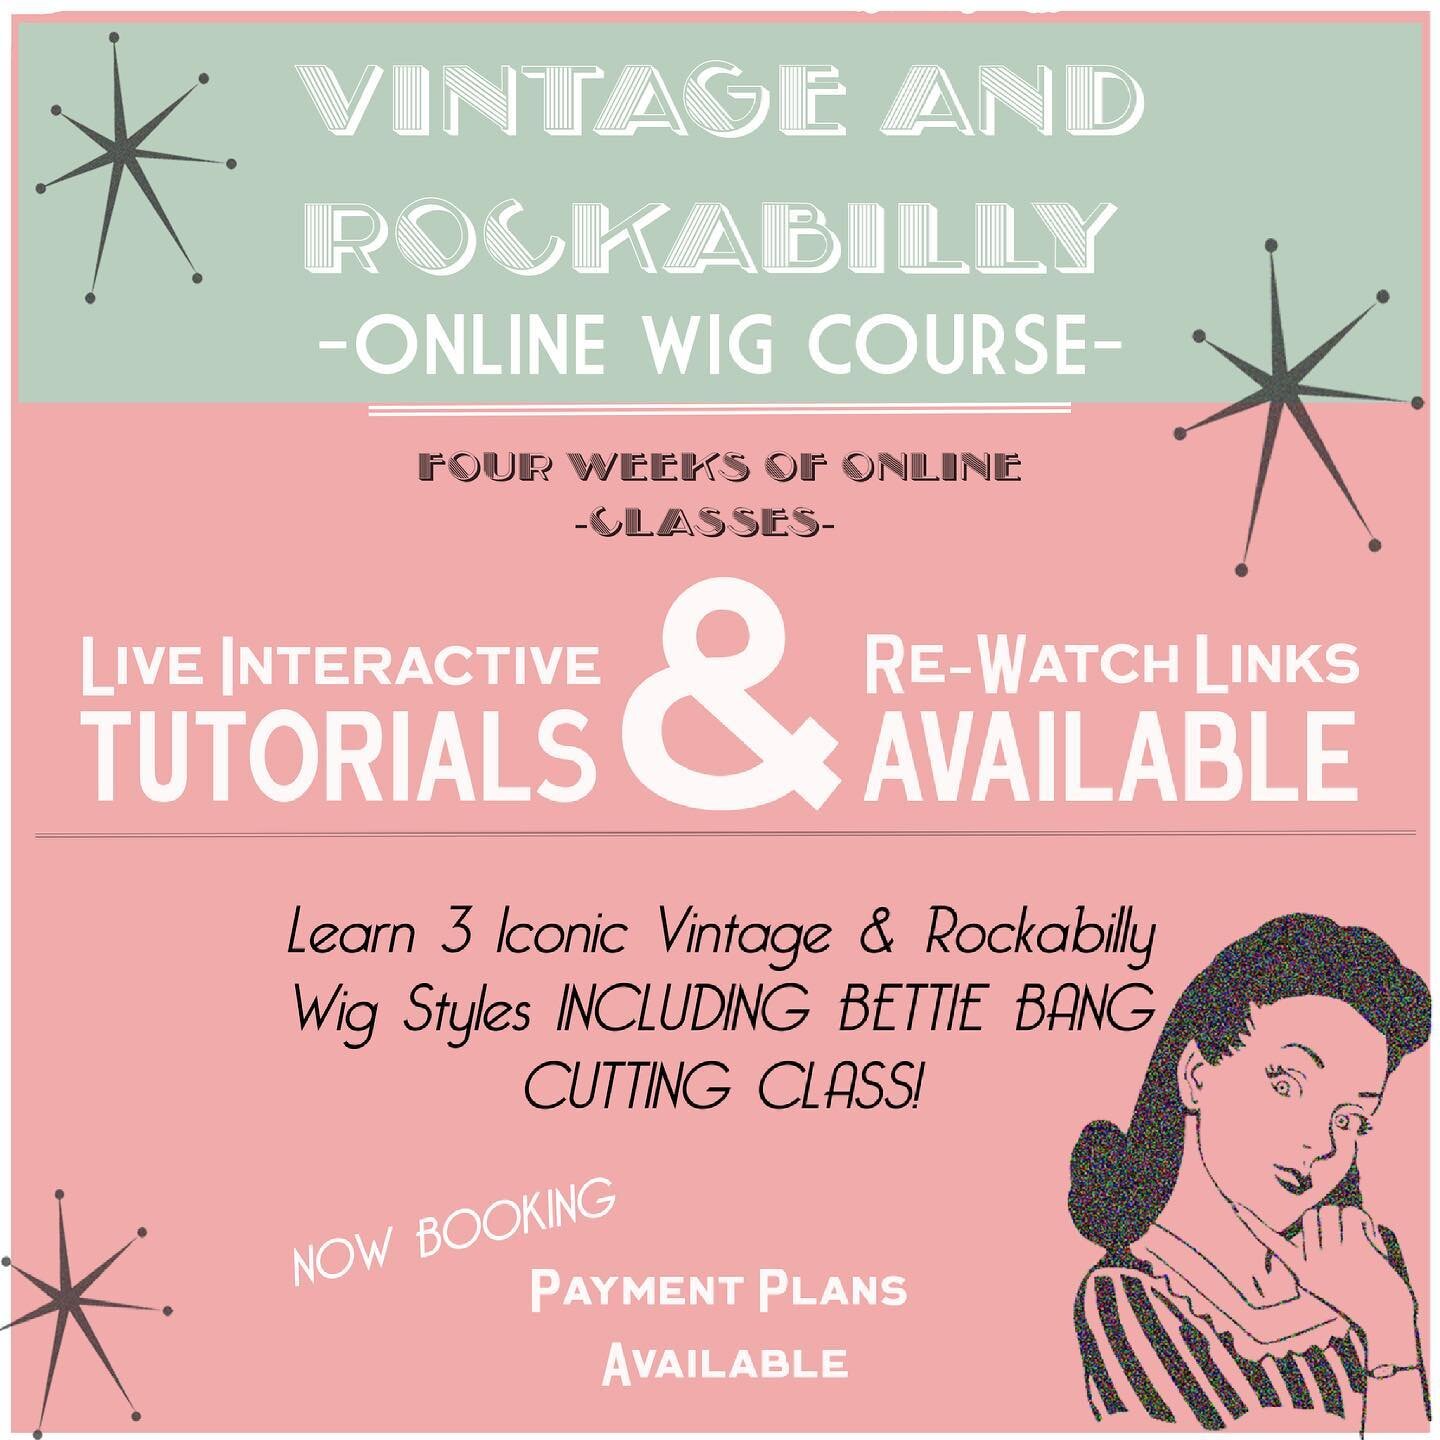 ✨Vintage &amp; Rockabilly Online Wig Course! Now Booking😱 ✨ Includes:
&bull;4 weeks of online wig classes
&bull;Illustrated Course Handbook
&bull;Rewatch options and downloadable copies of all classes
&bull;Access to Private Course Instagram page wi